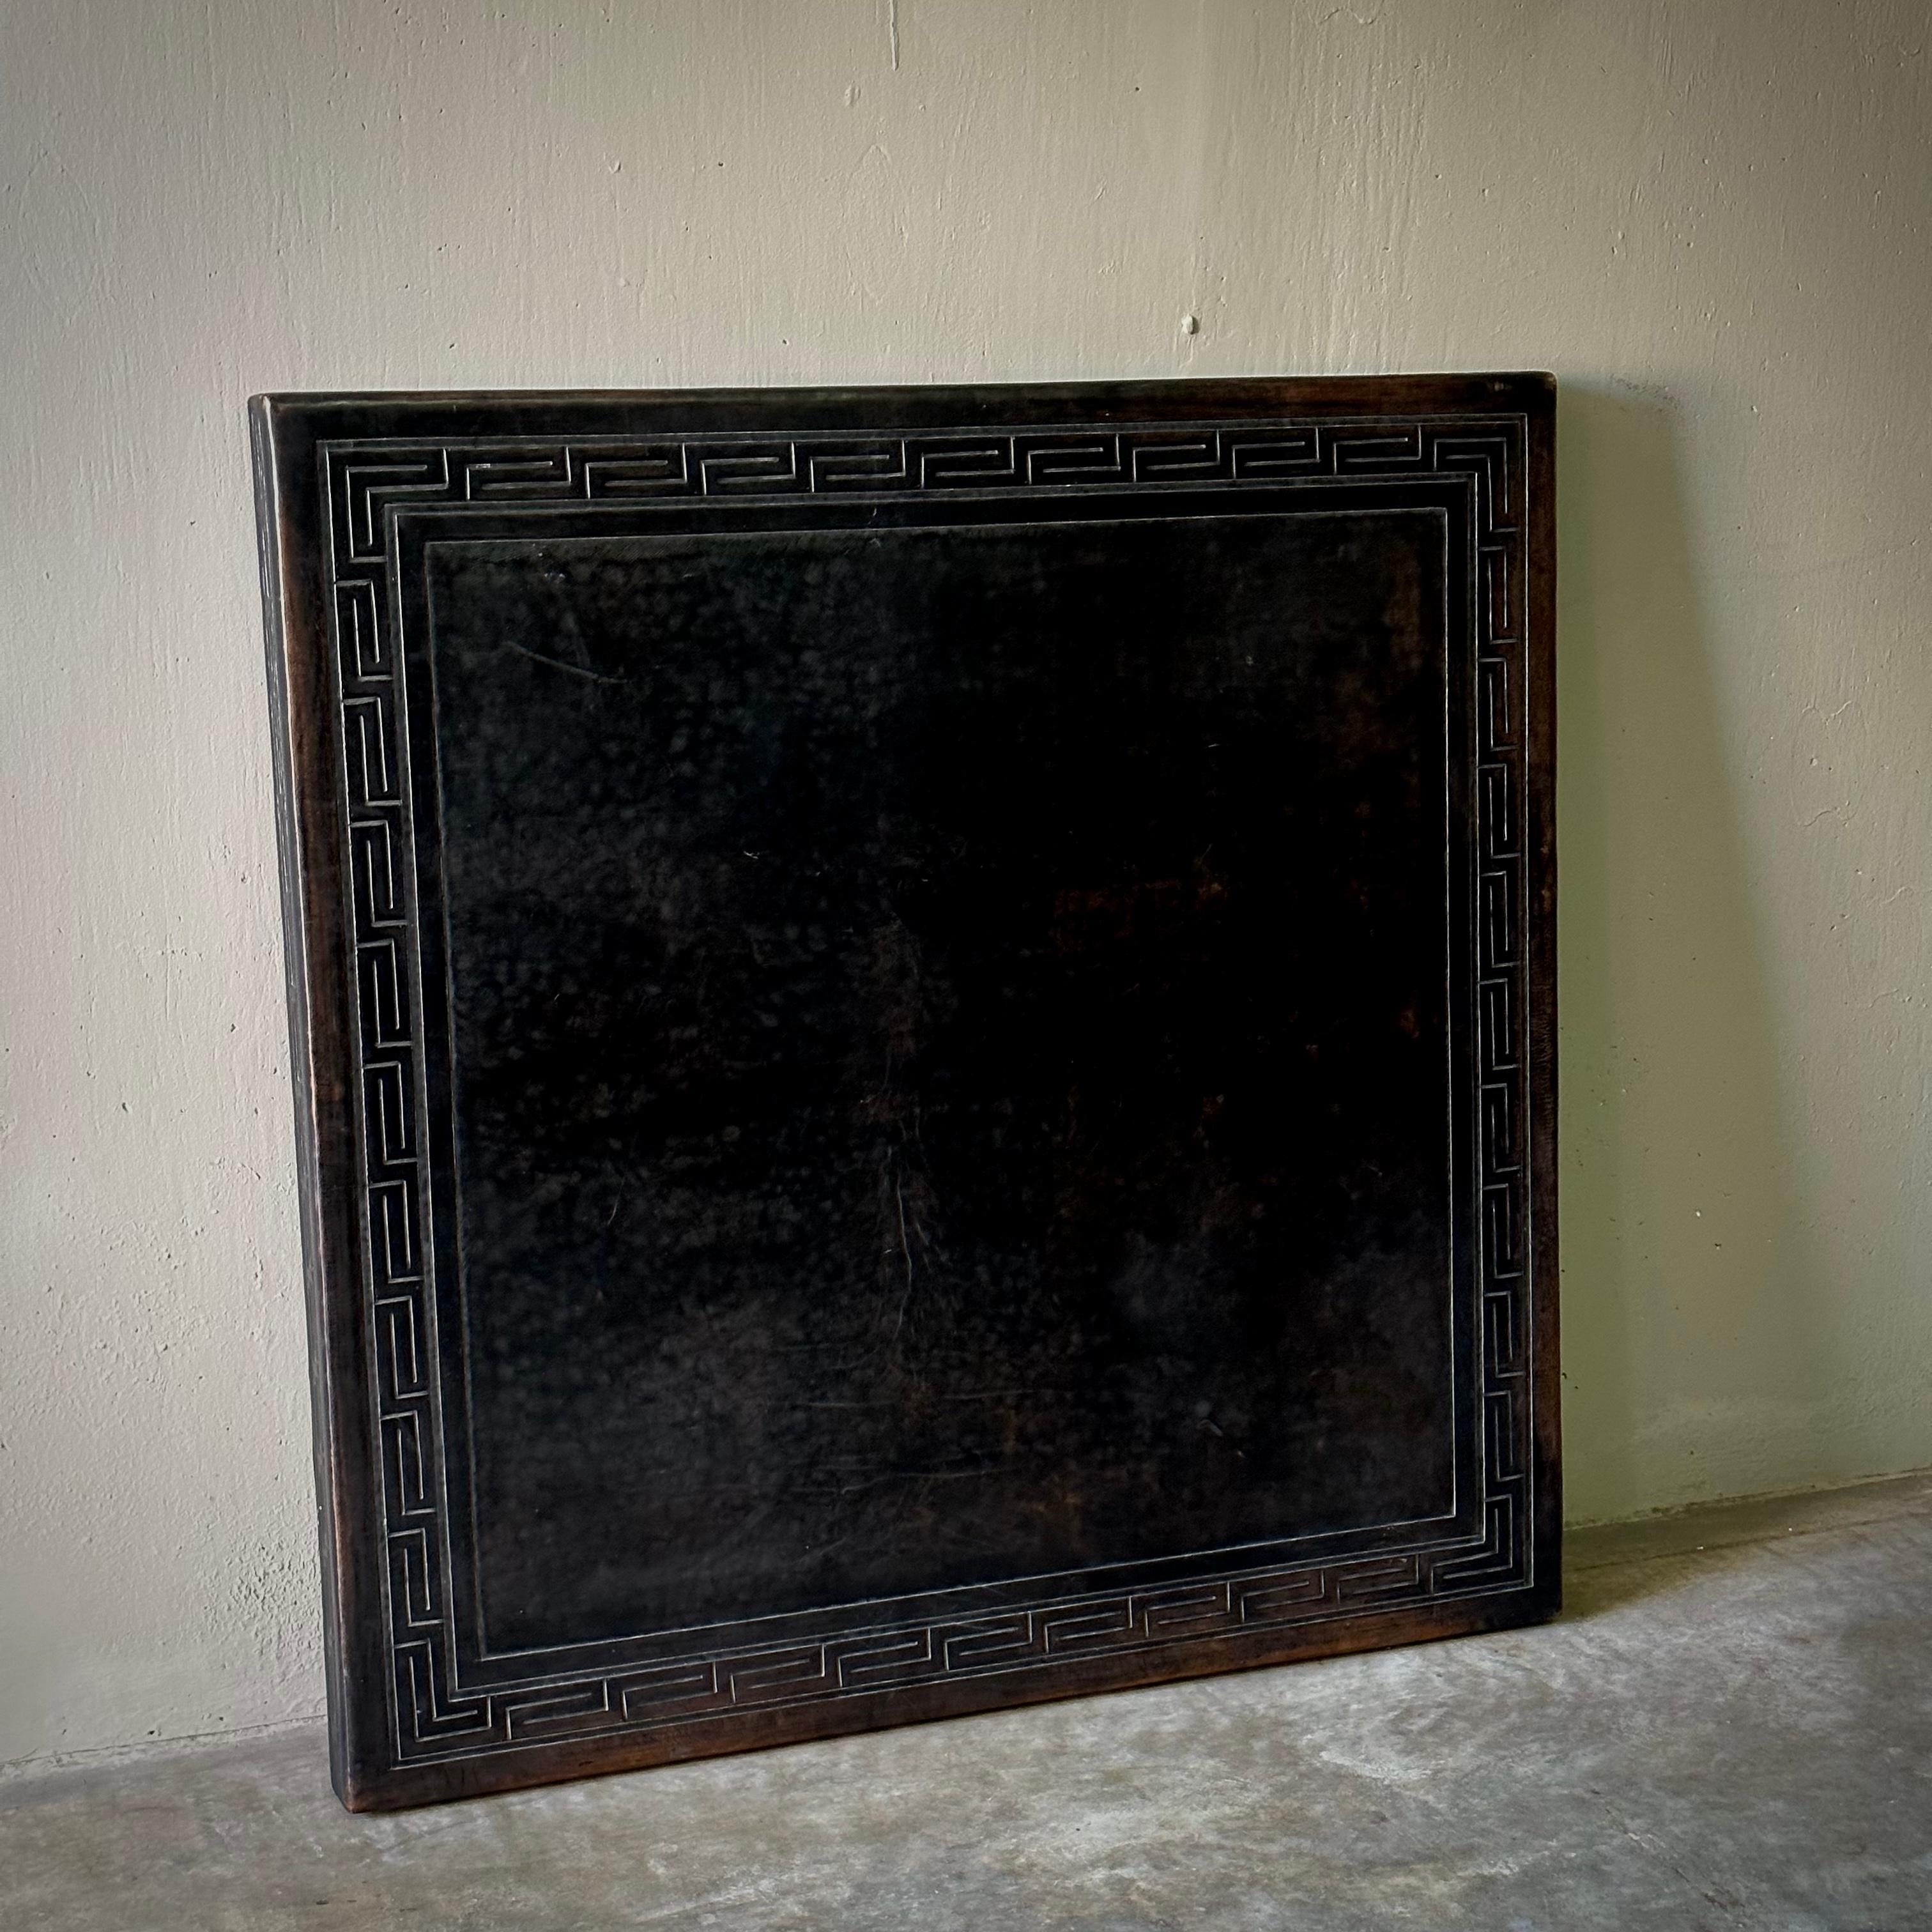 Dutch mid-century square black leather table top, in the style of the legendary designer Angel Pazmino. Features elegant embossed Greek key motif at perimeter and exquisite patina. A handsome piece with understated mid-century flair and great